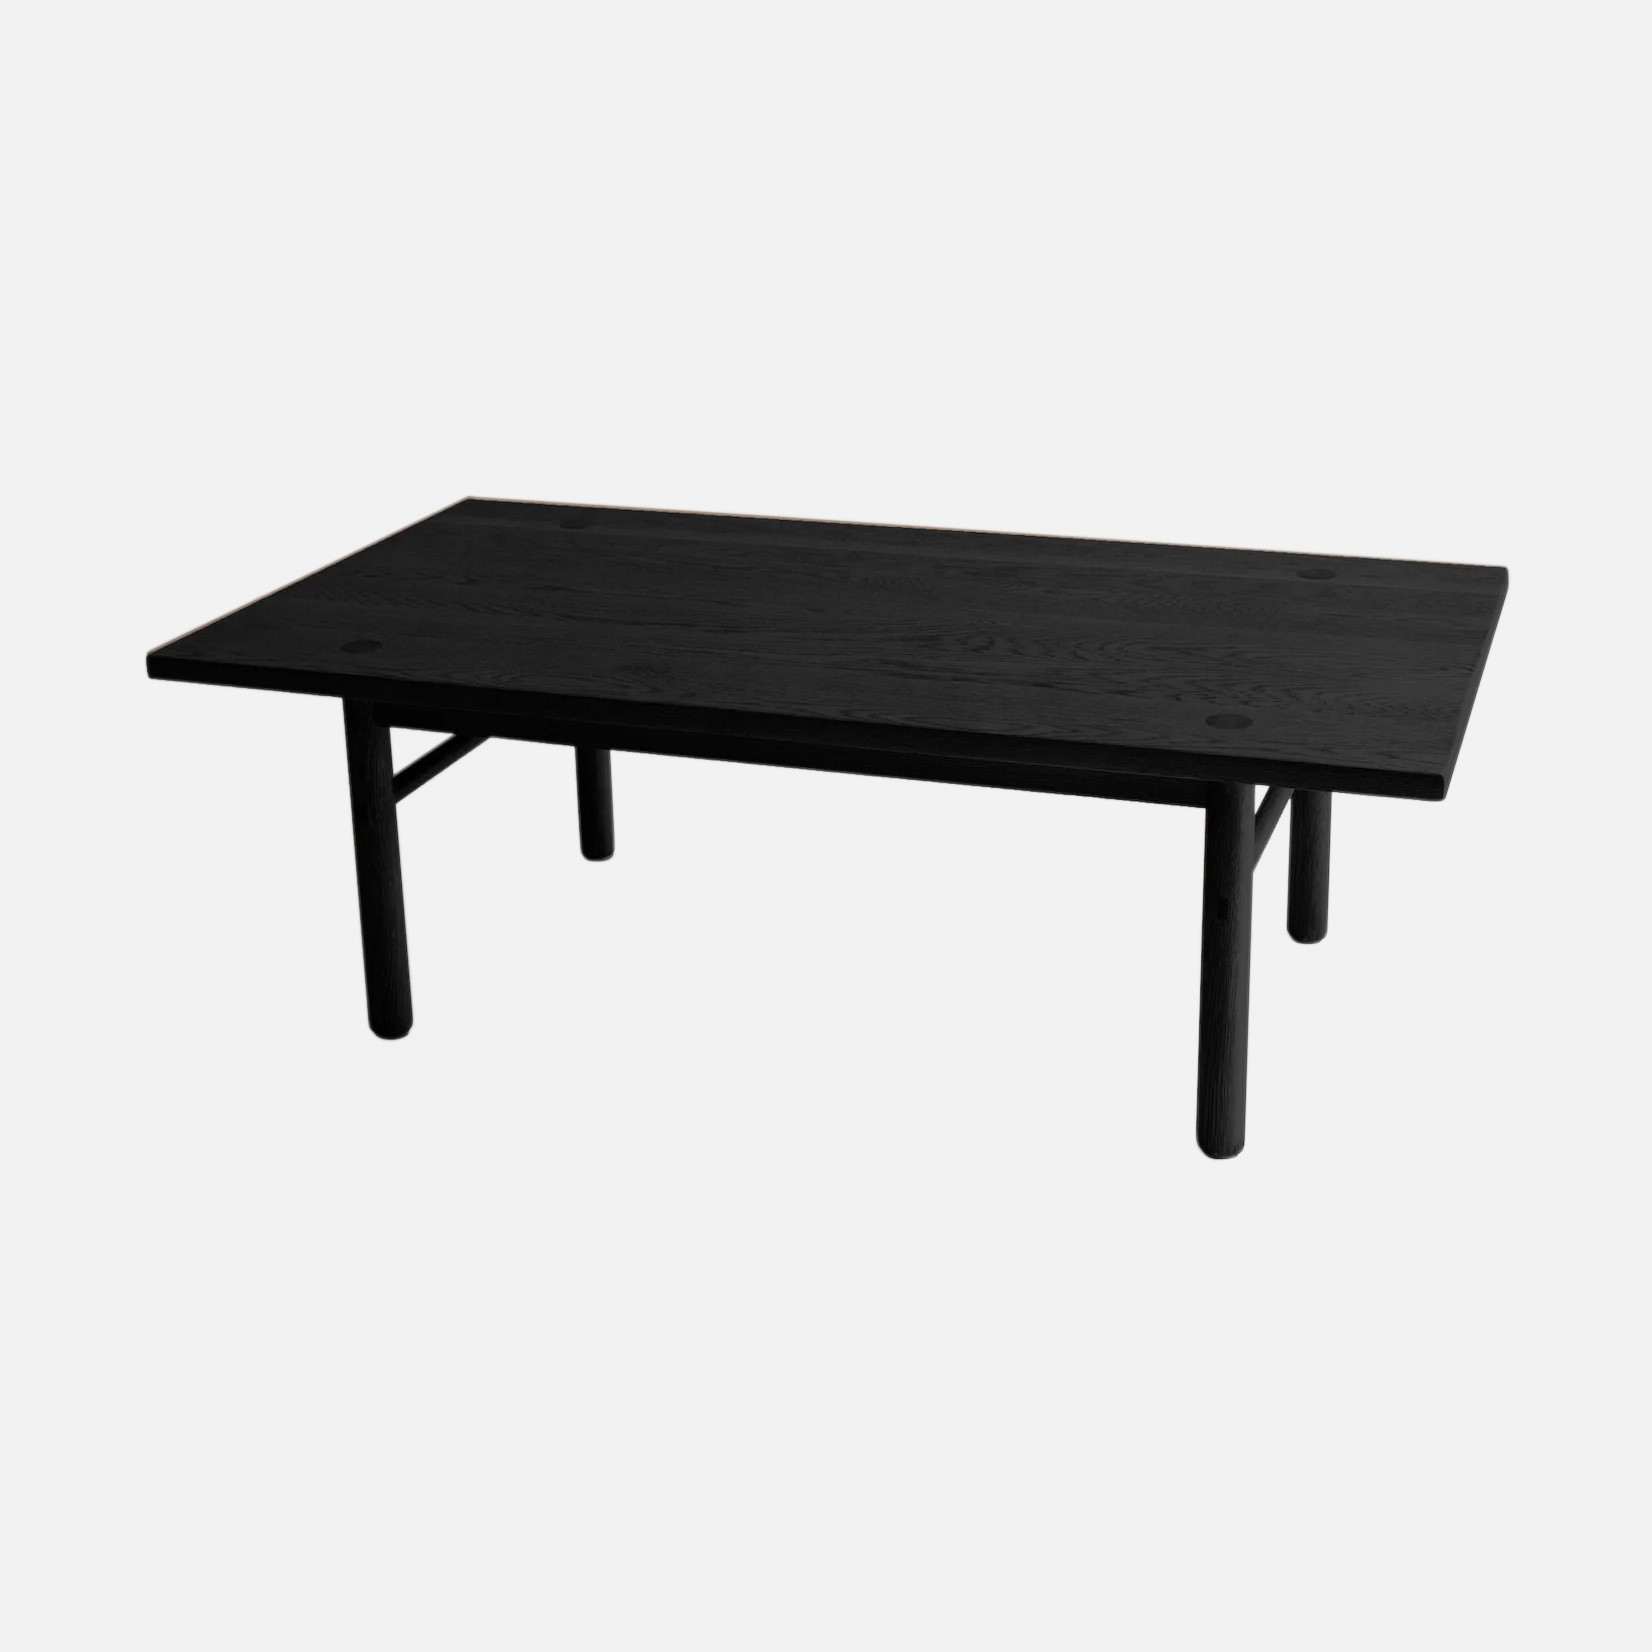 a black table sitting on top of a white floor